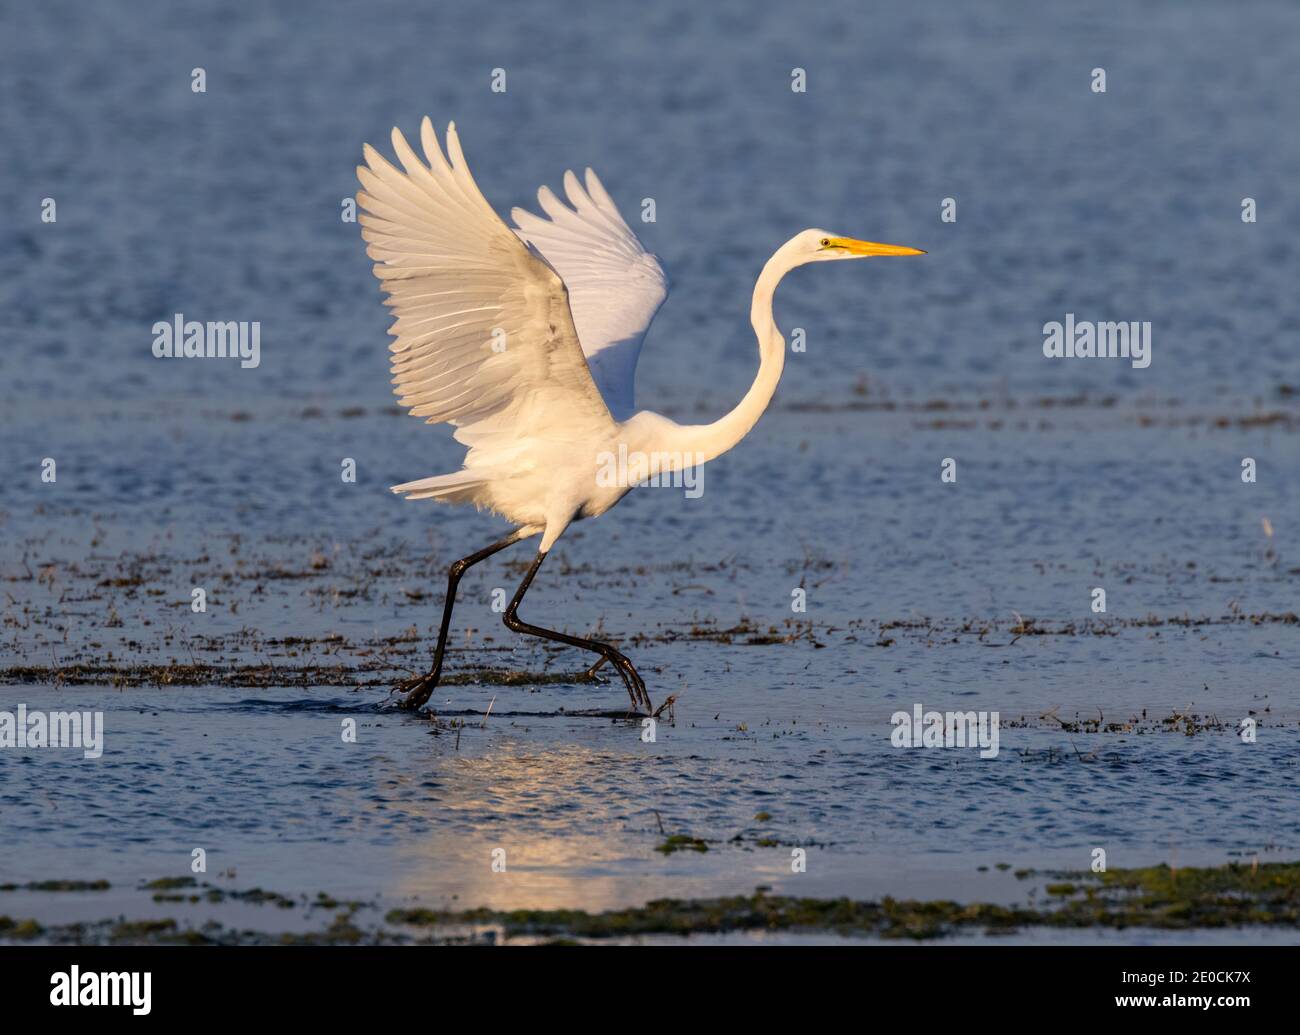 Great egret (Ardea alba) running in shallow water near the lake coast in an attempt to disturb little fish for dinner, Chok Canyon State Park, Texas, Stock Photo